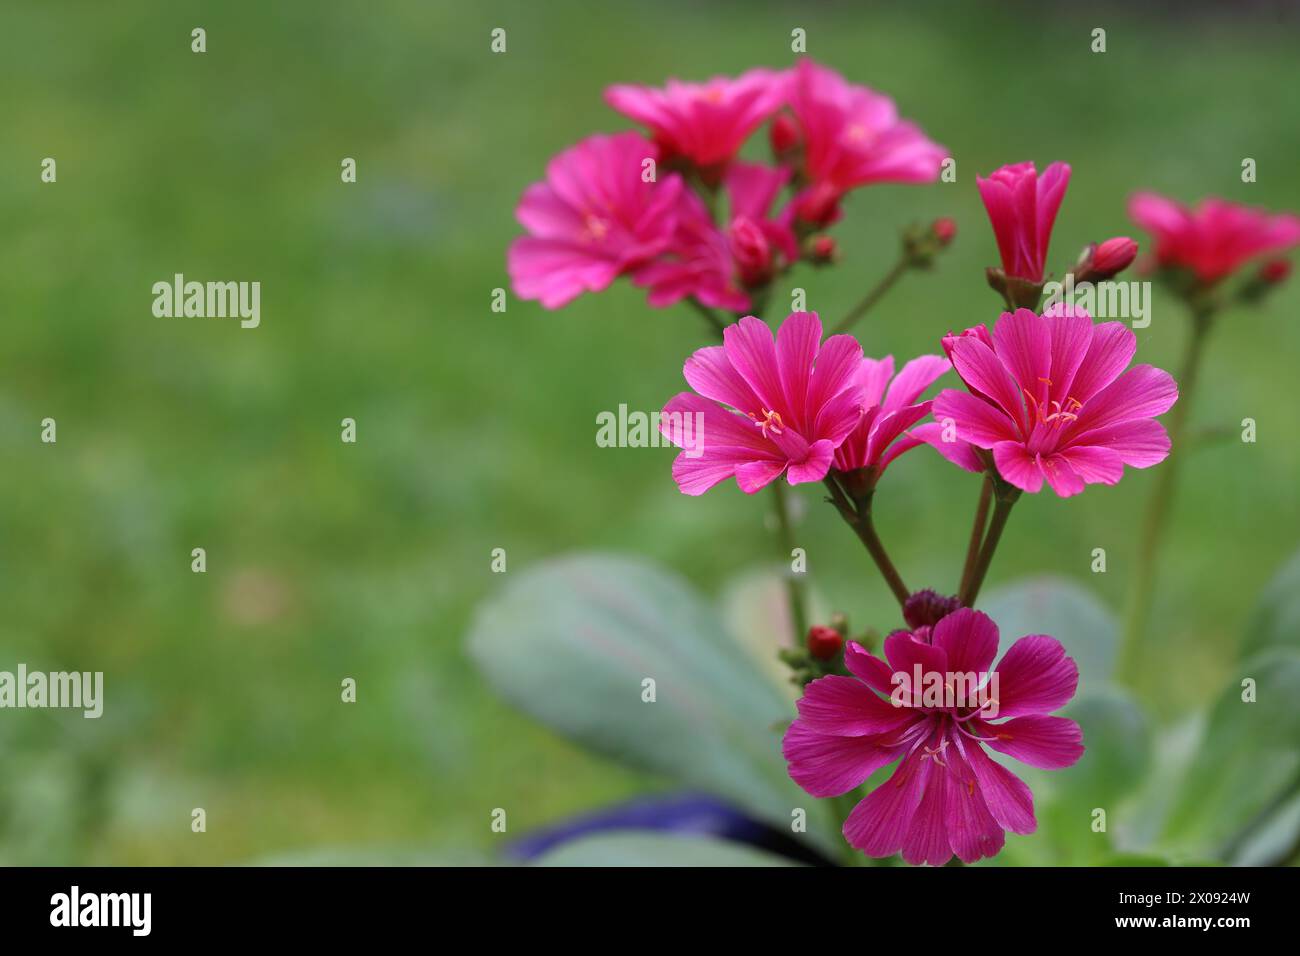 Close-up of a salmon flowering Lewisia cotyledon 'Eldora', blurry green background, copy space Stock Photo